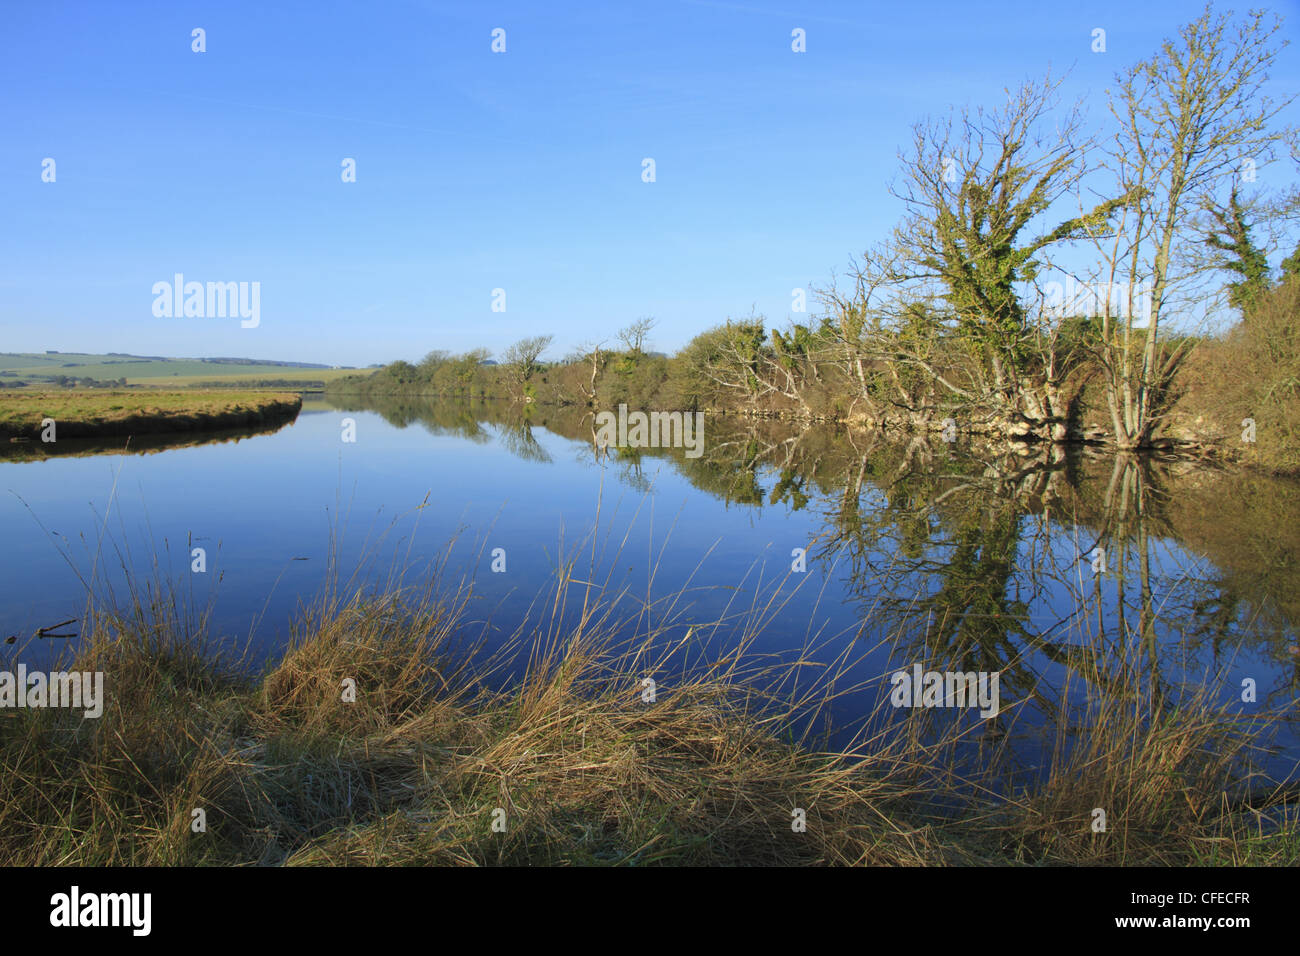 Le rive del fiume Cuckmere, Exceat, East Sussex, Inghilterra Foto Stock